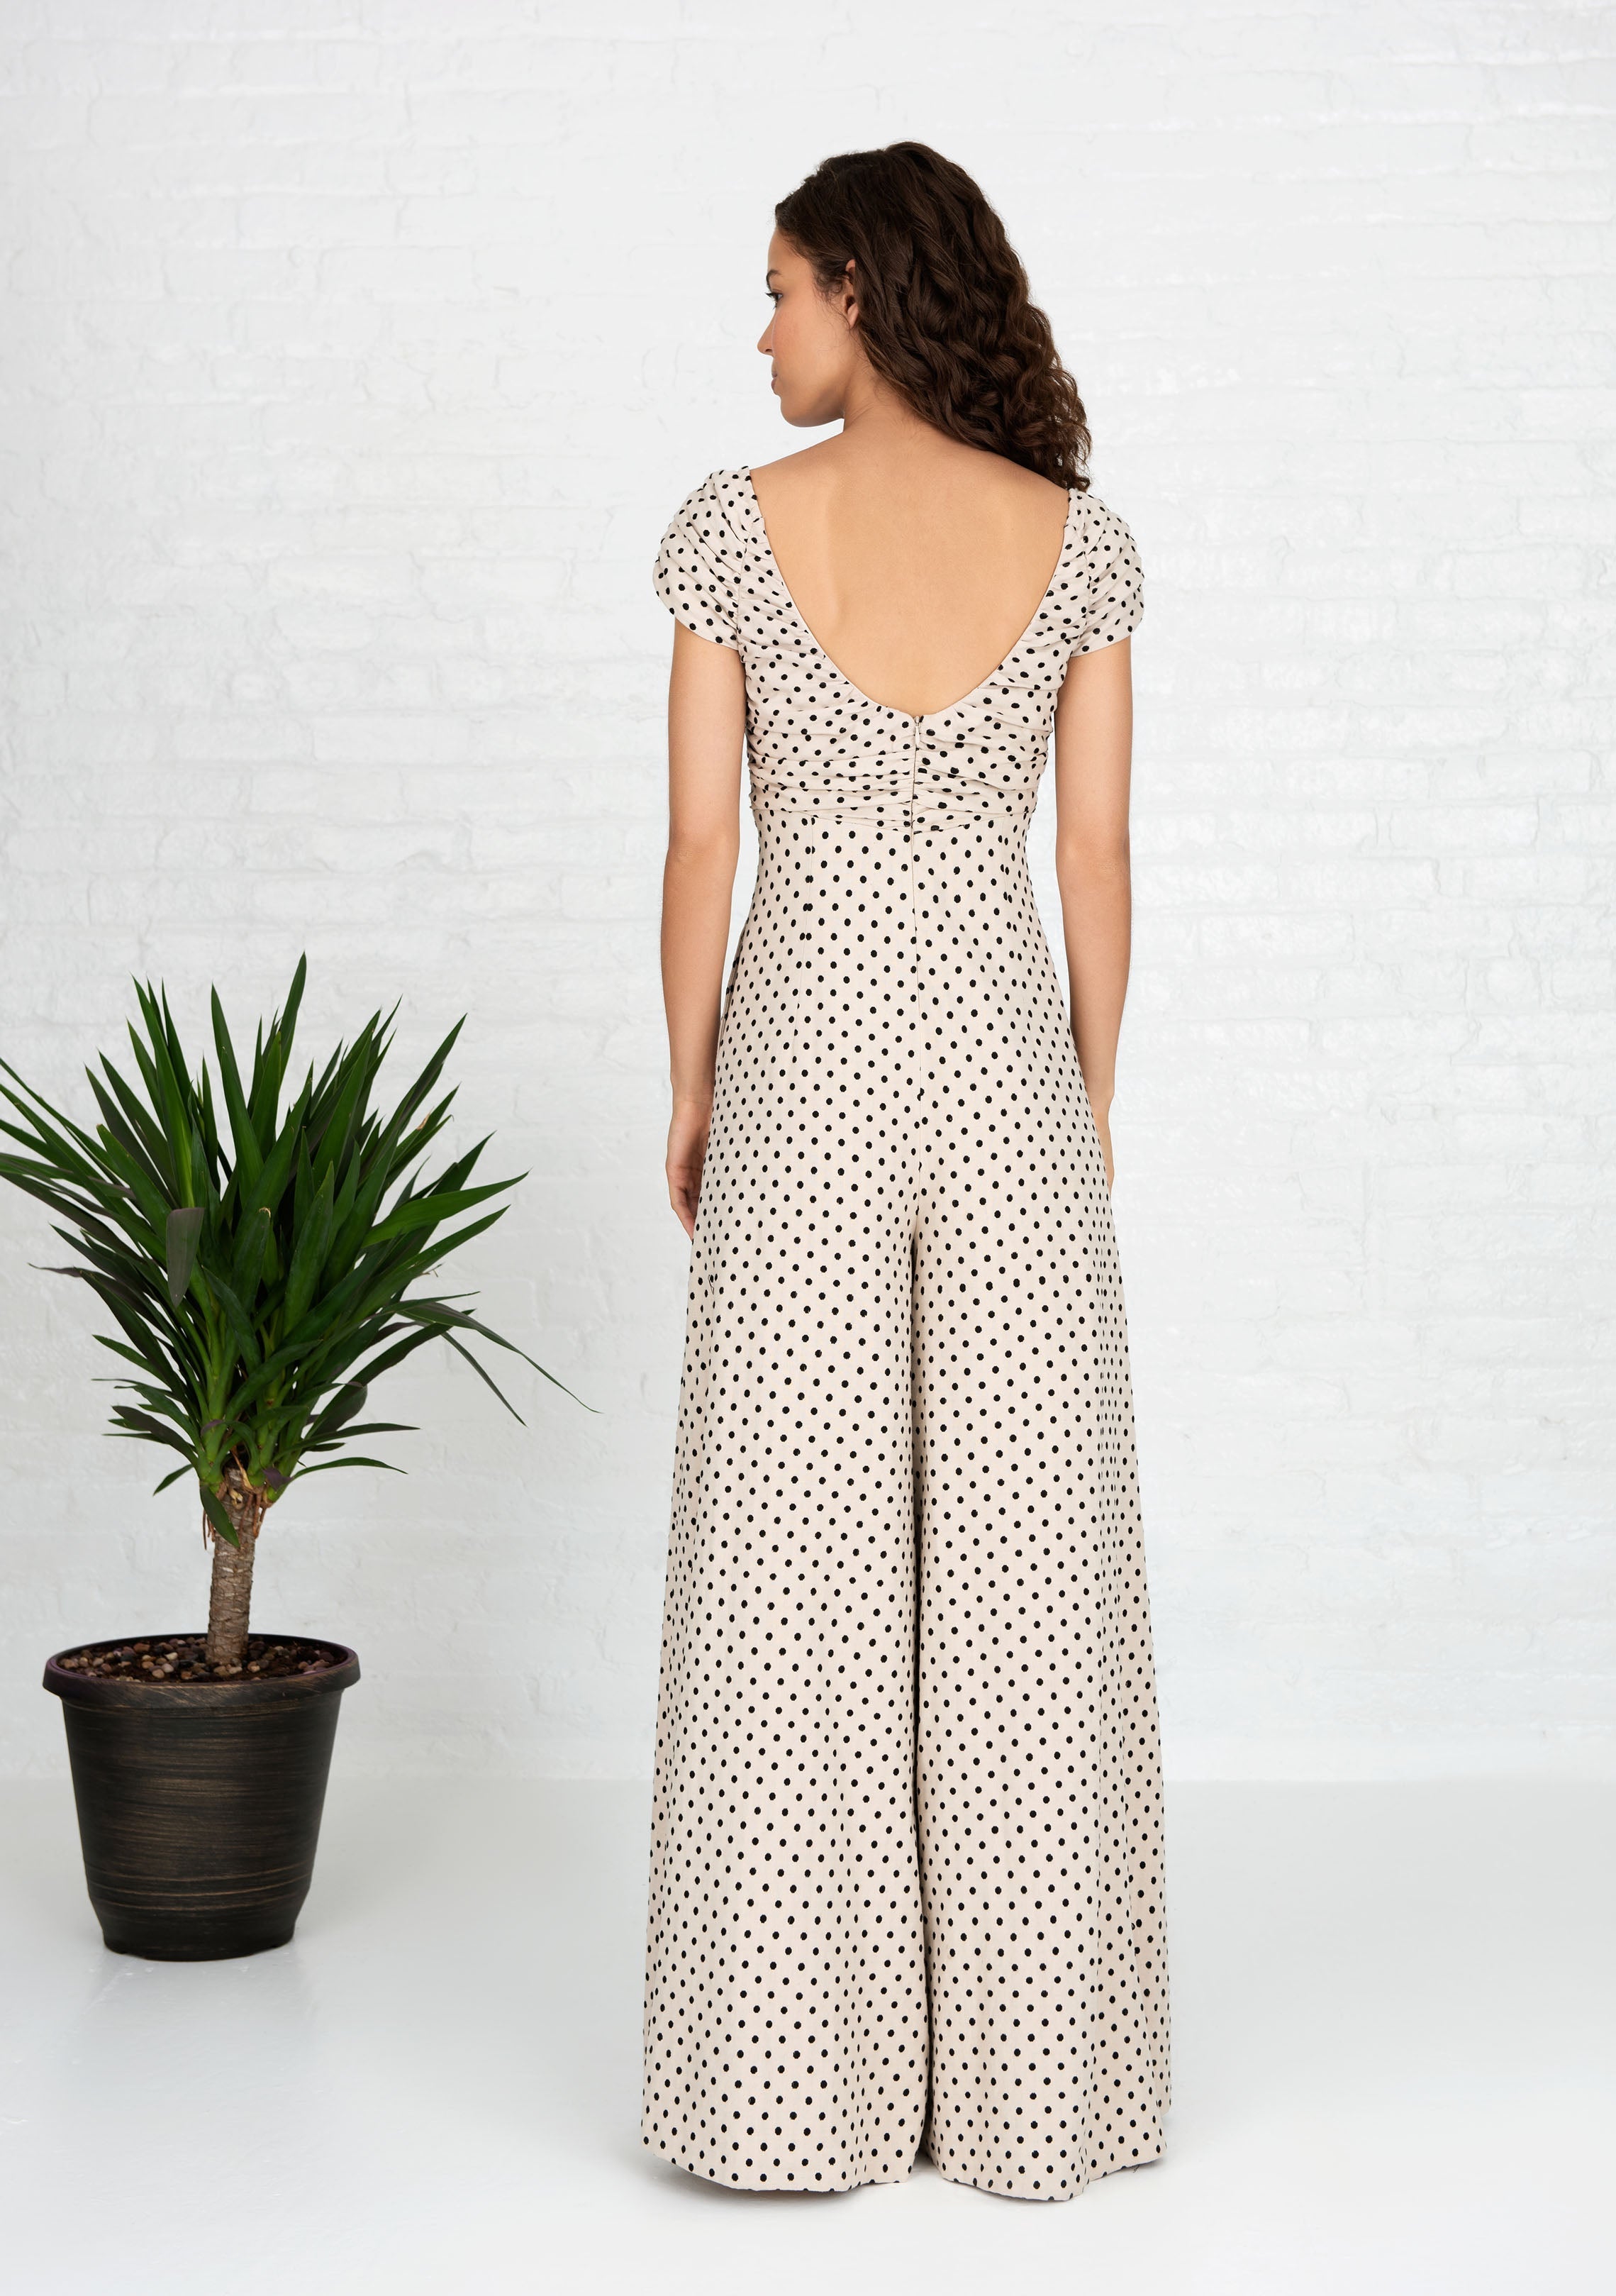 back view of woman wearing beige and black polka dot jumpsuit with tie up front